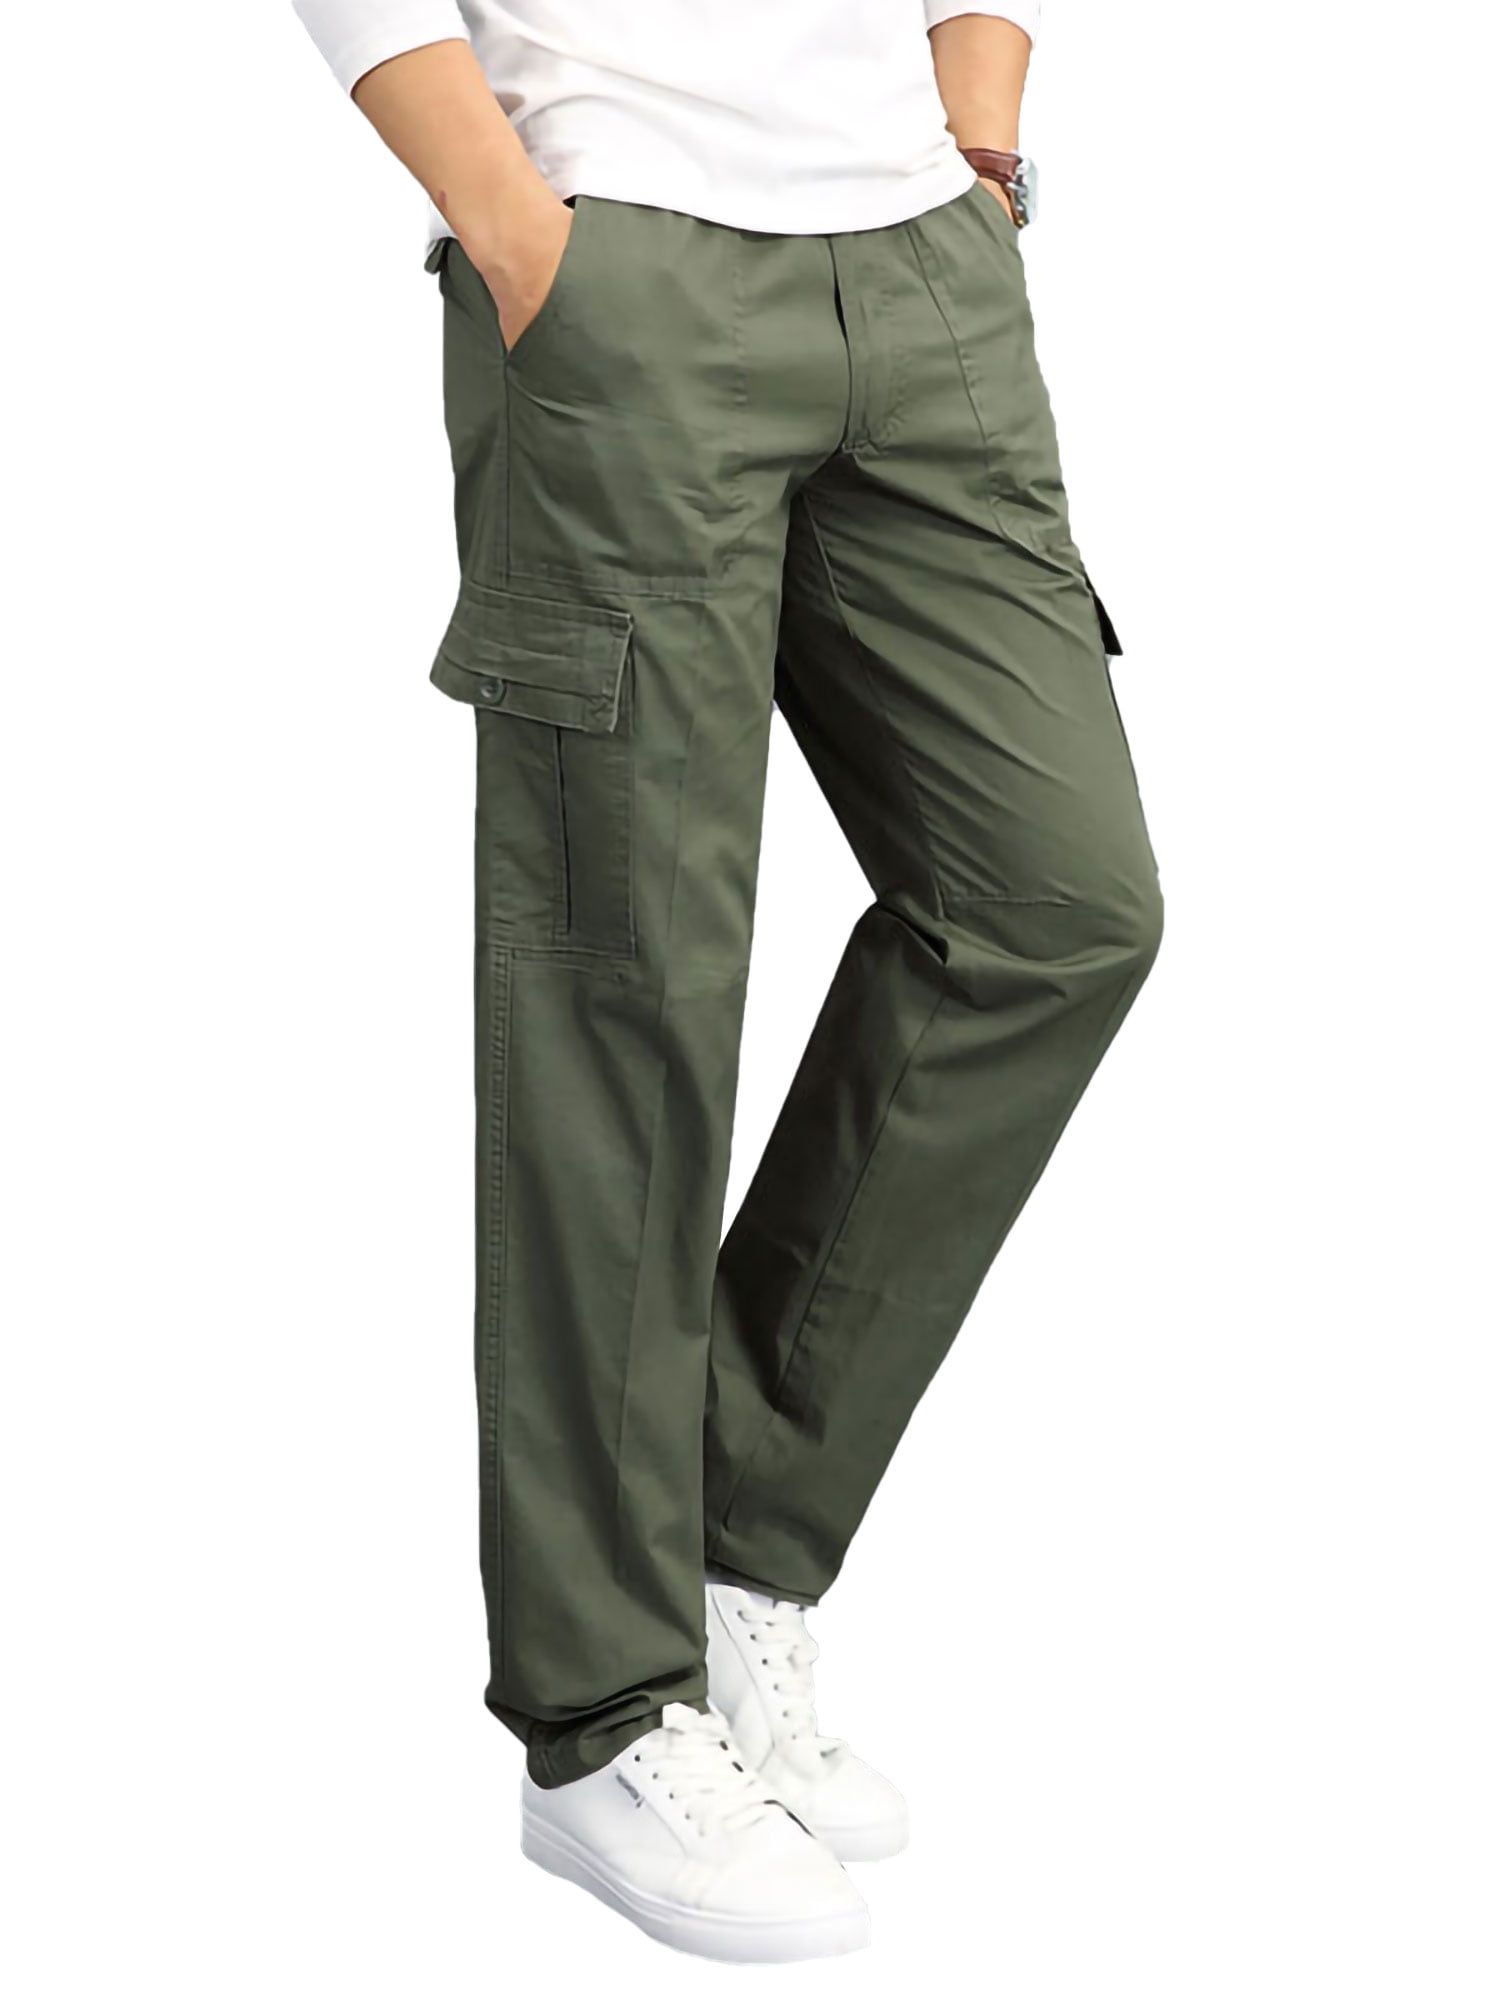 Mens Tactical Outdoor Hiking Pants Cargo Military Combat Comfy Work Trousers Hot 